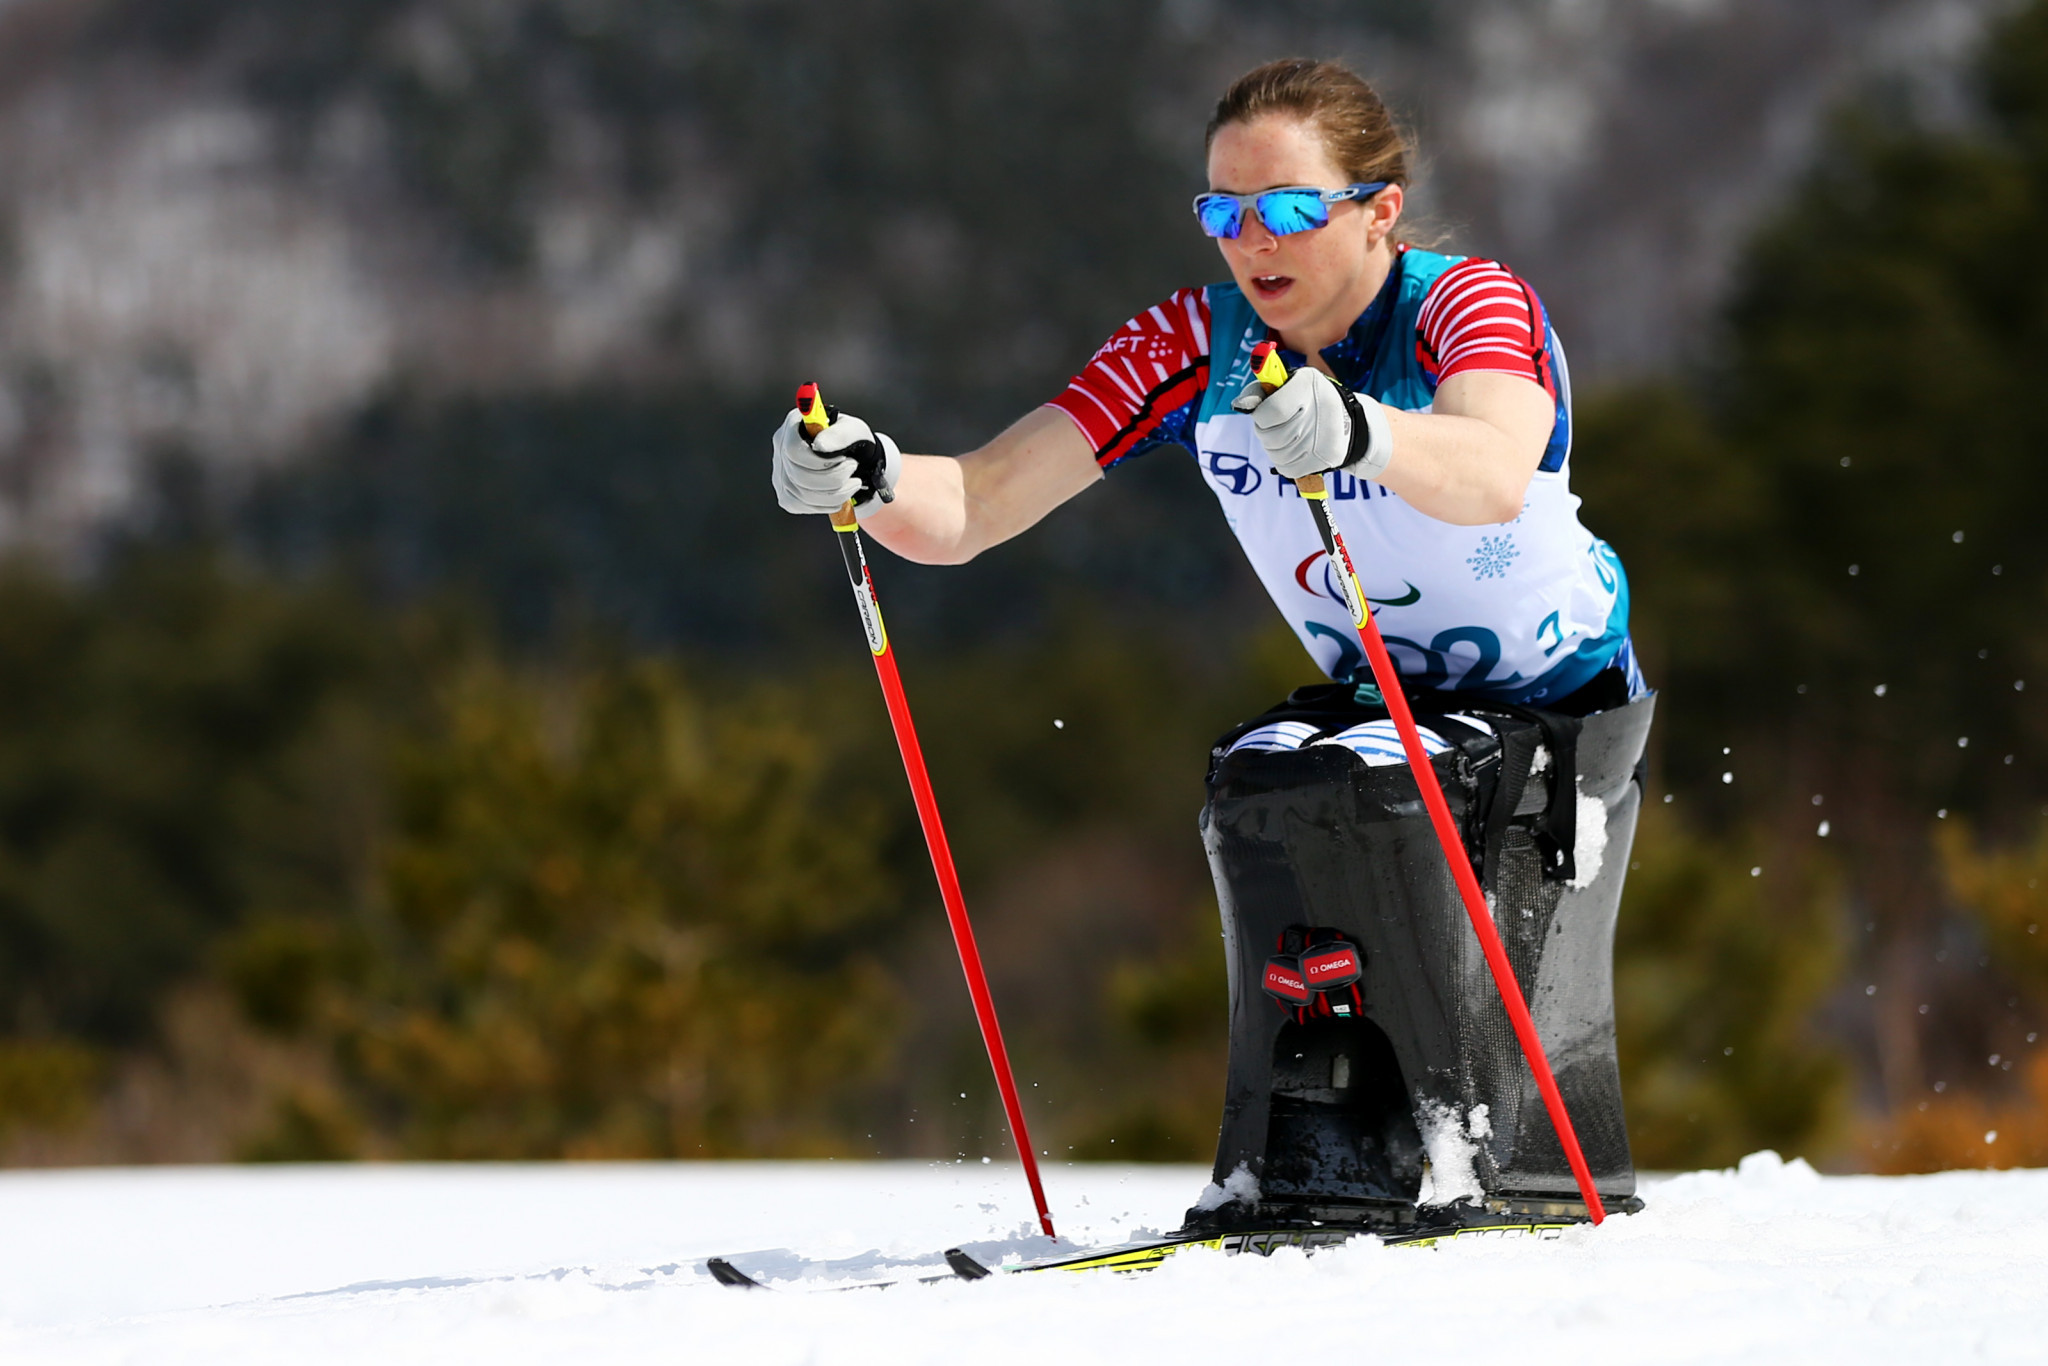 Para-Nordic skier Gretsch headlines APC Athlete of the Month nominations